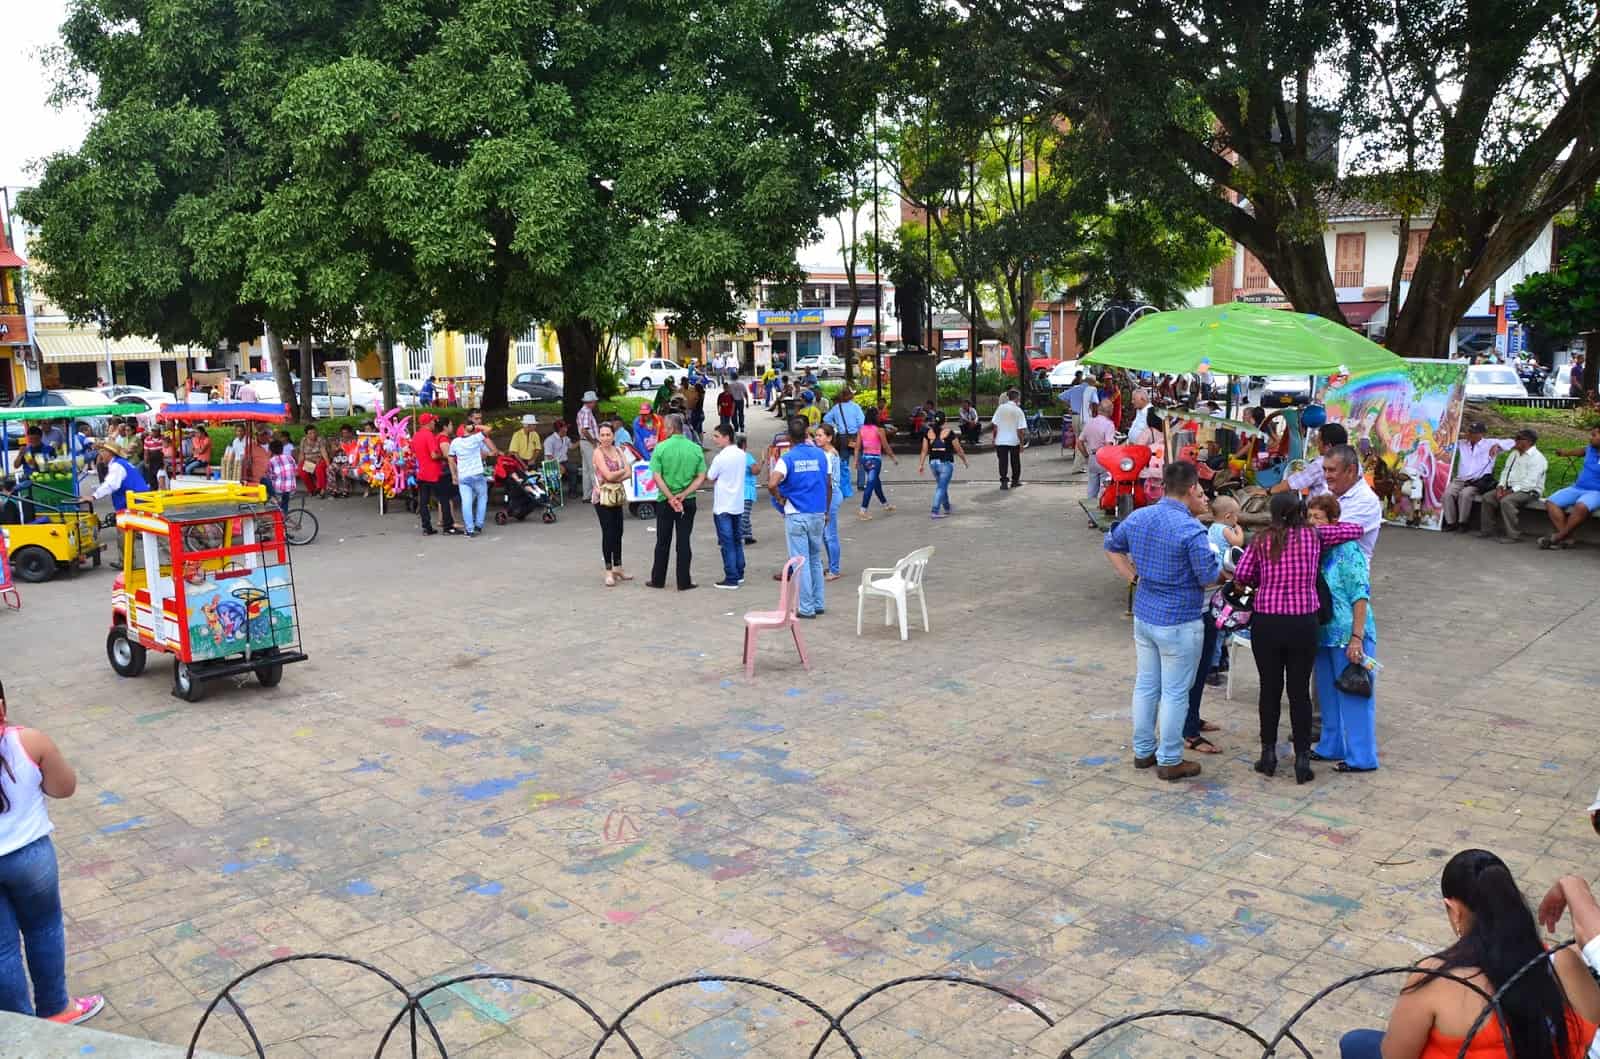 Plaza in Quimbaya, Quindío, Colombia